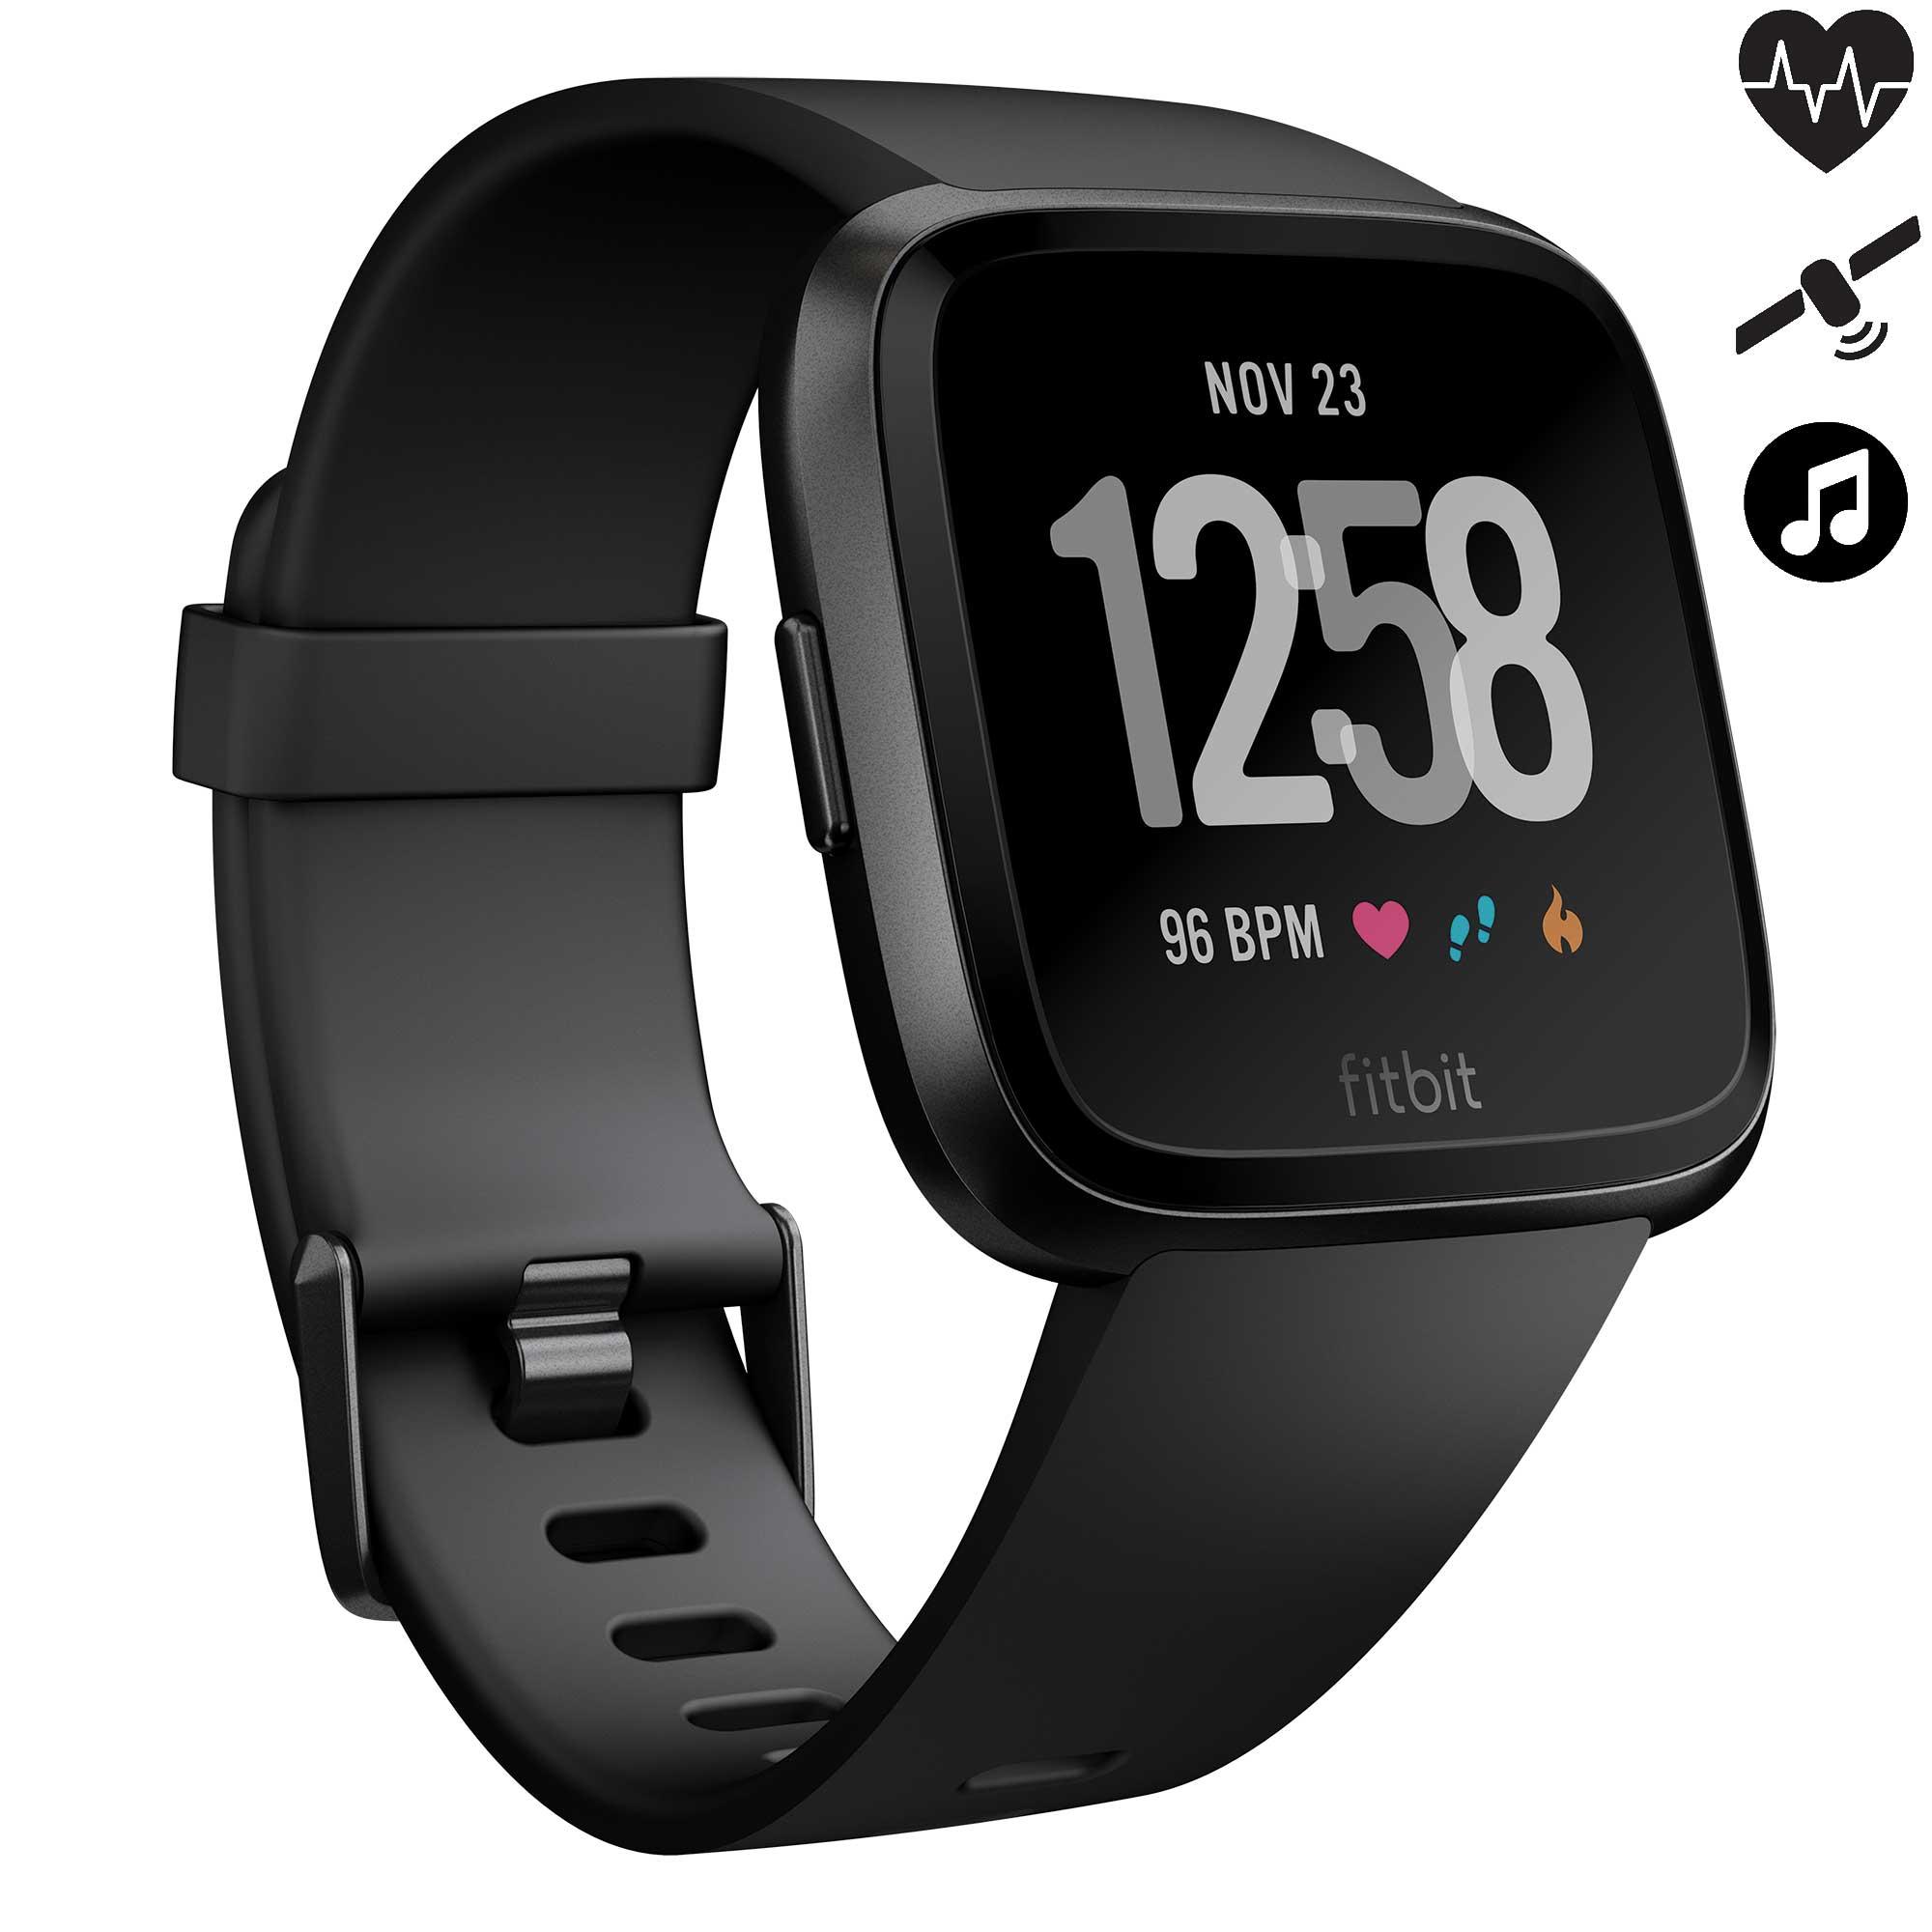 VERSA CONNECTED WRISTWATCH WITH HEART 